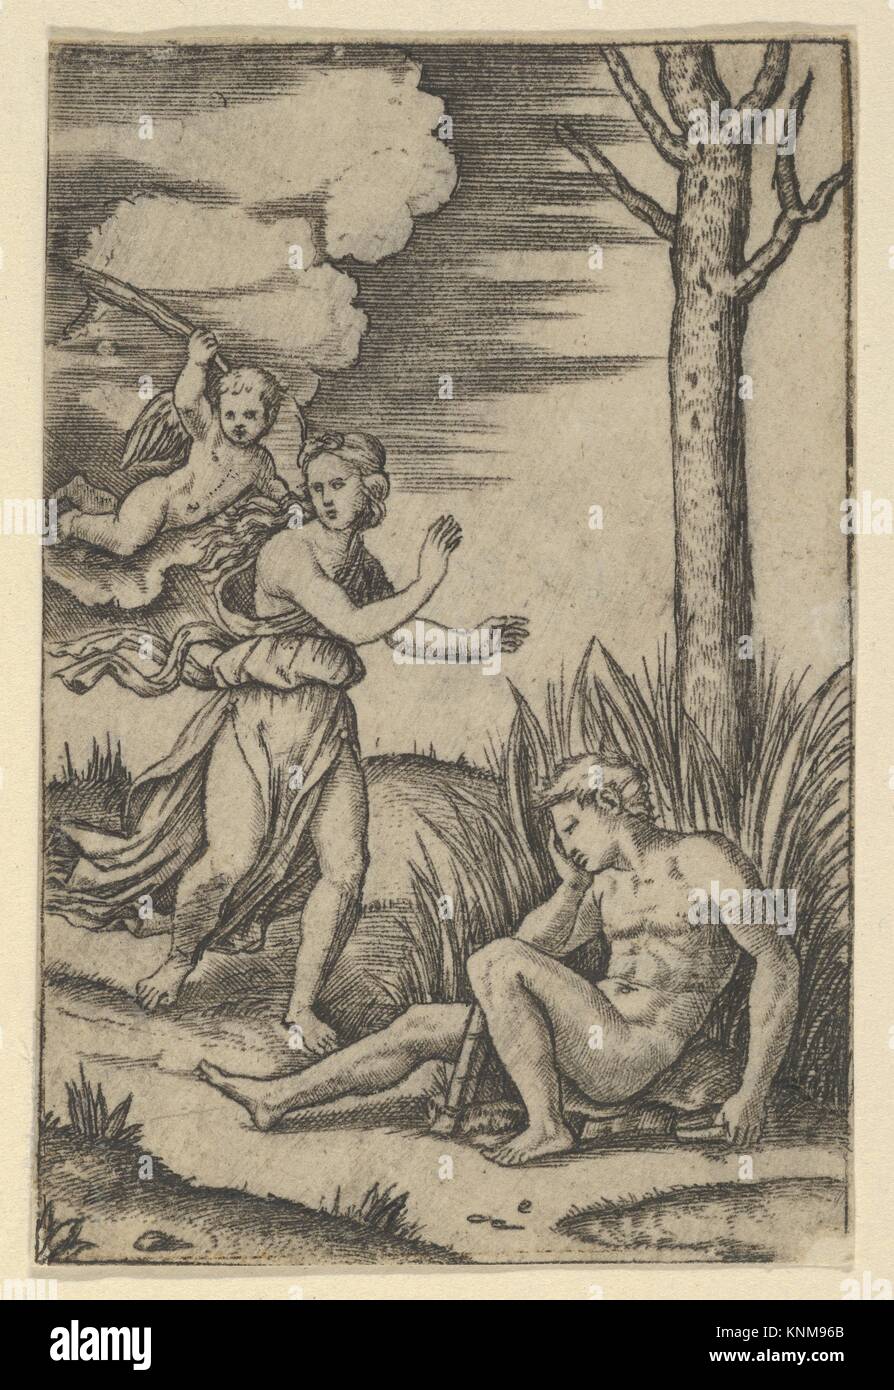 Diana followed by cupid at left, Endymion at right. Artist: Marcantonio ...